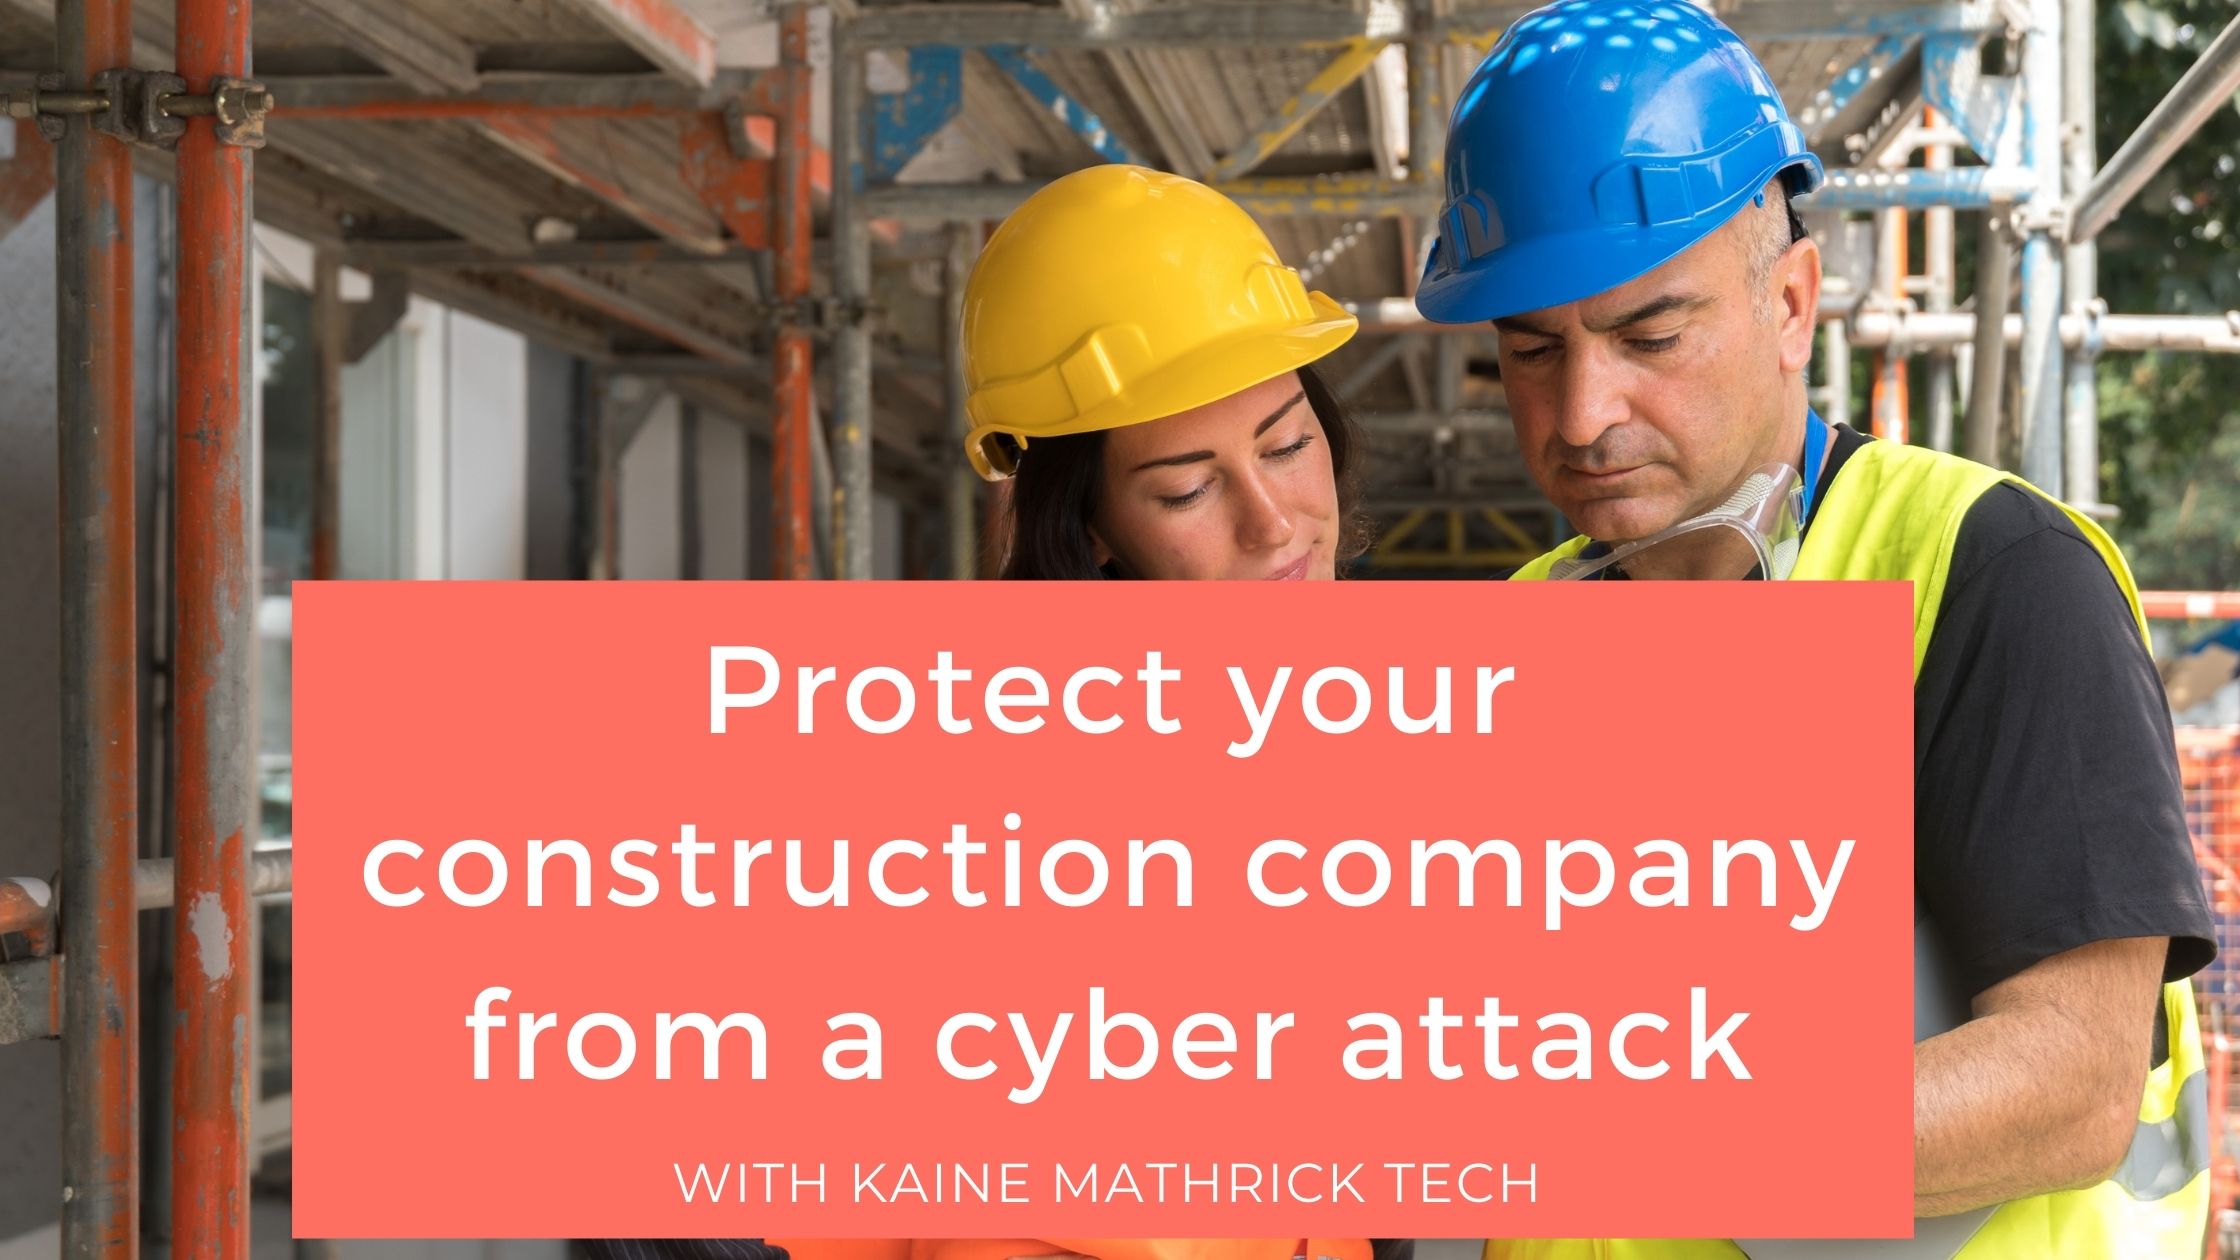 15 ways to protect your construction company from a cyber attack